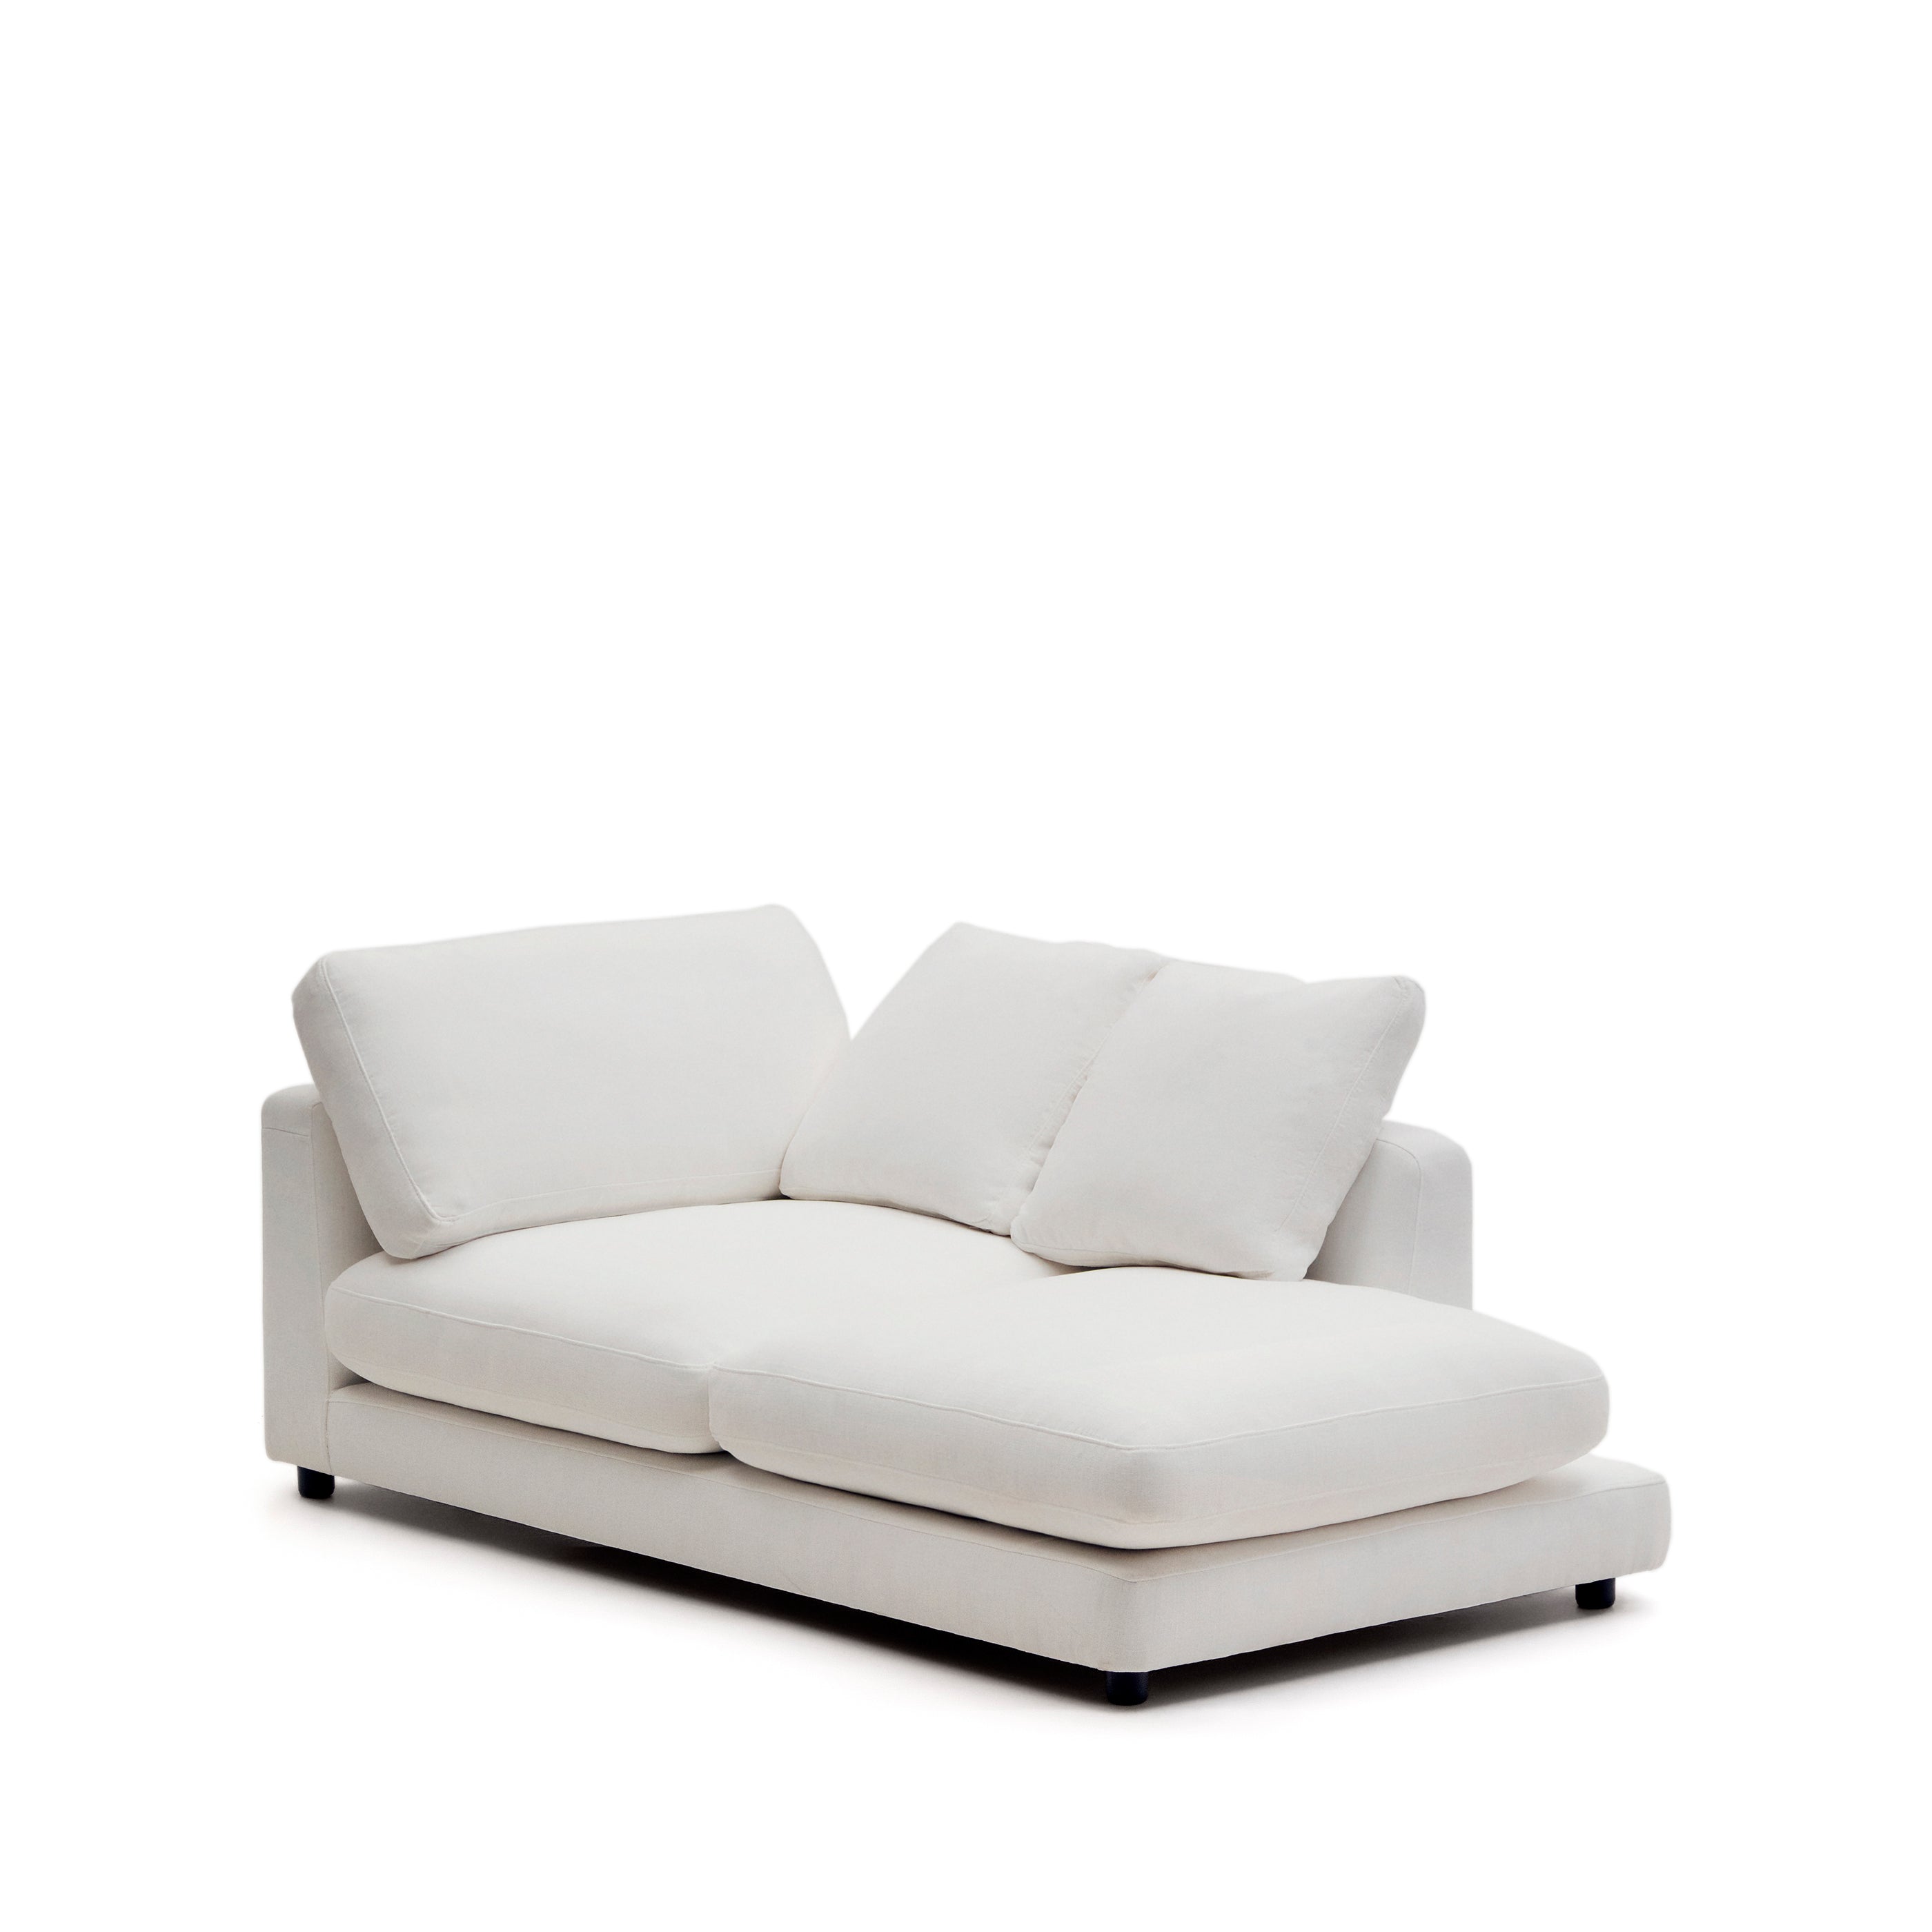 Gala right chaise longue in white, 193 x 105 cm